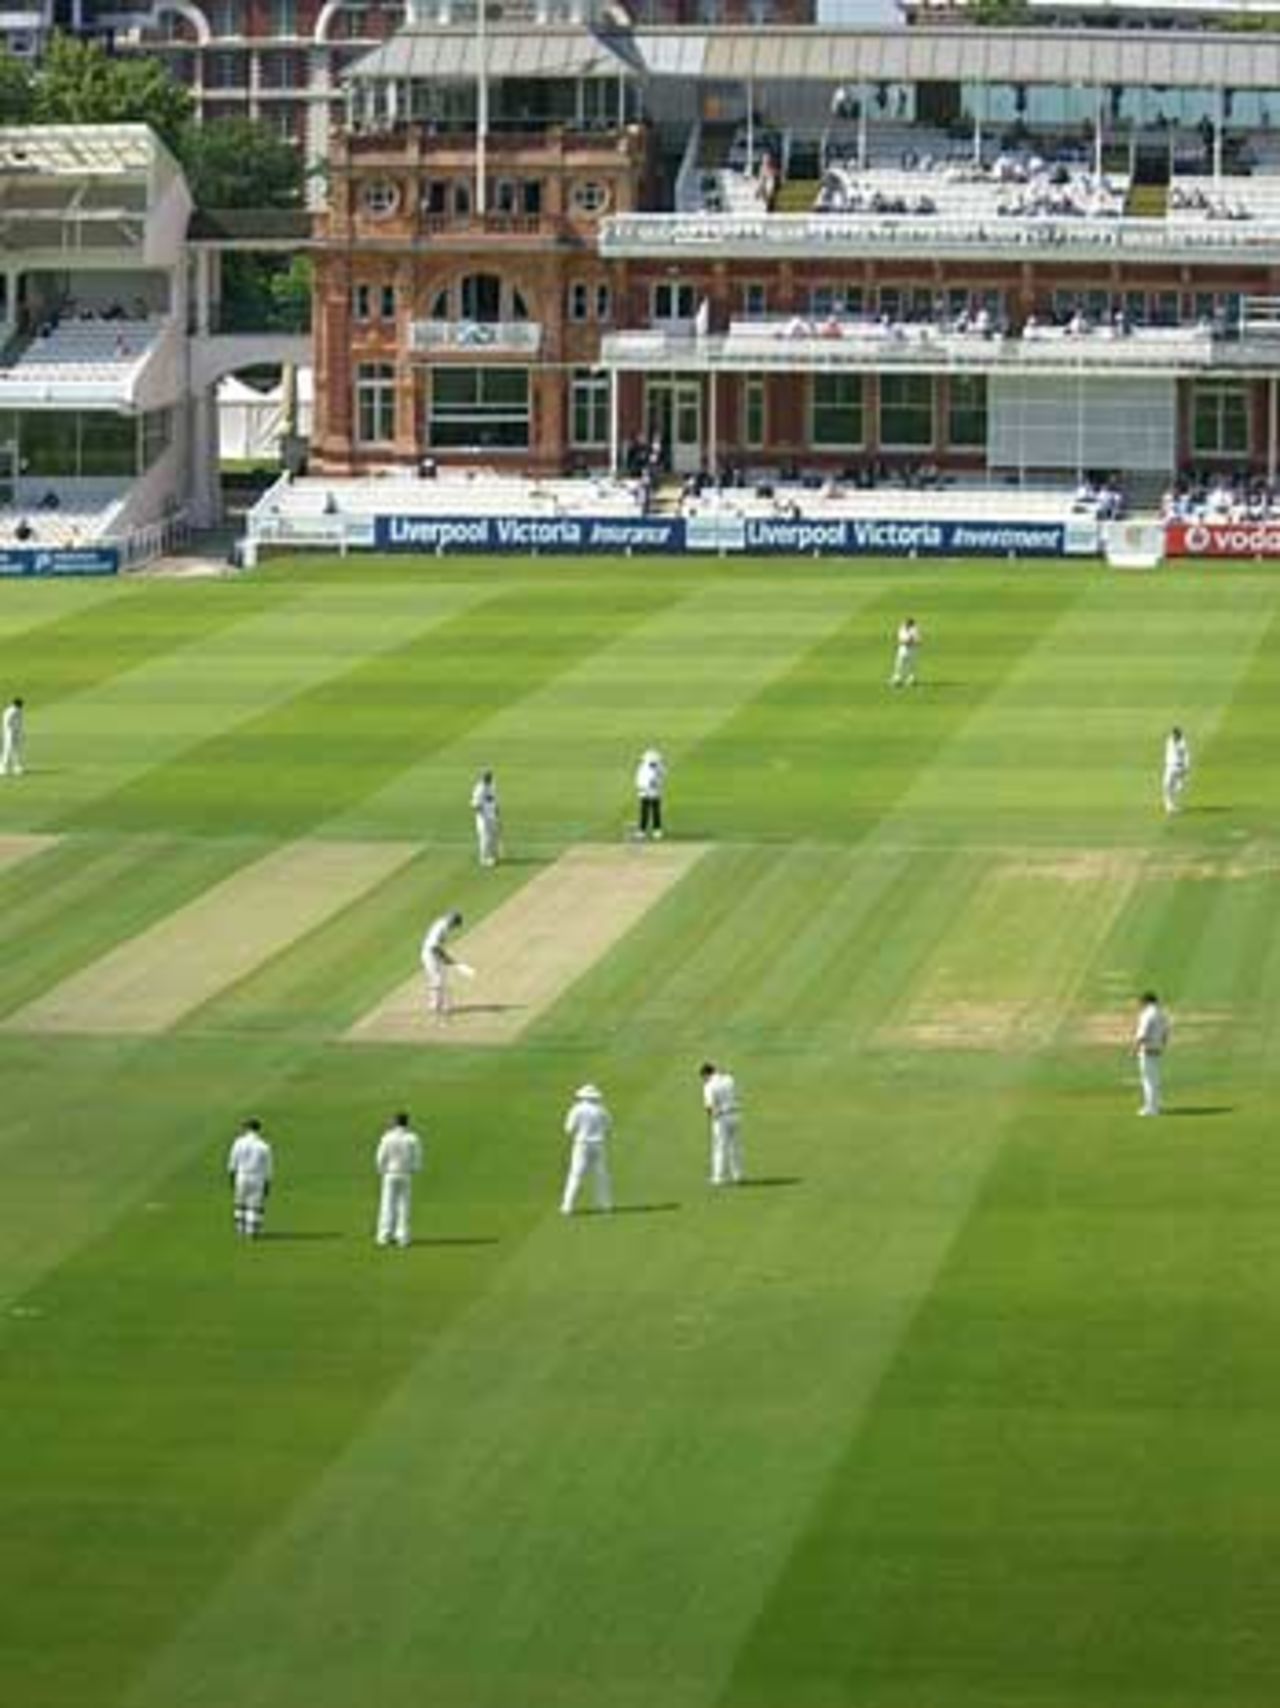 Chris Silverwood prepares to bowl to Mark Chilton, Middlesex v Lancashire, Lord's, June 21, 2006